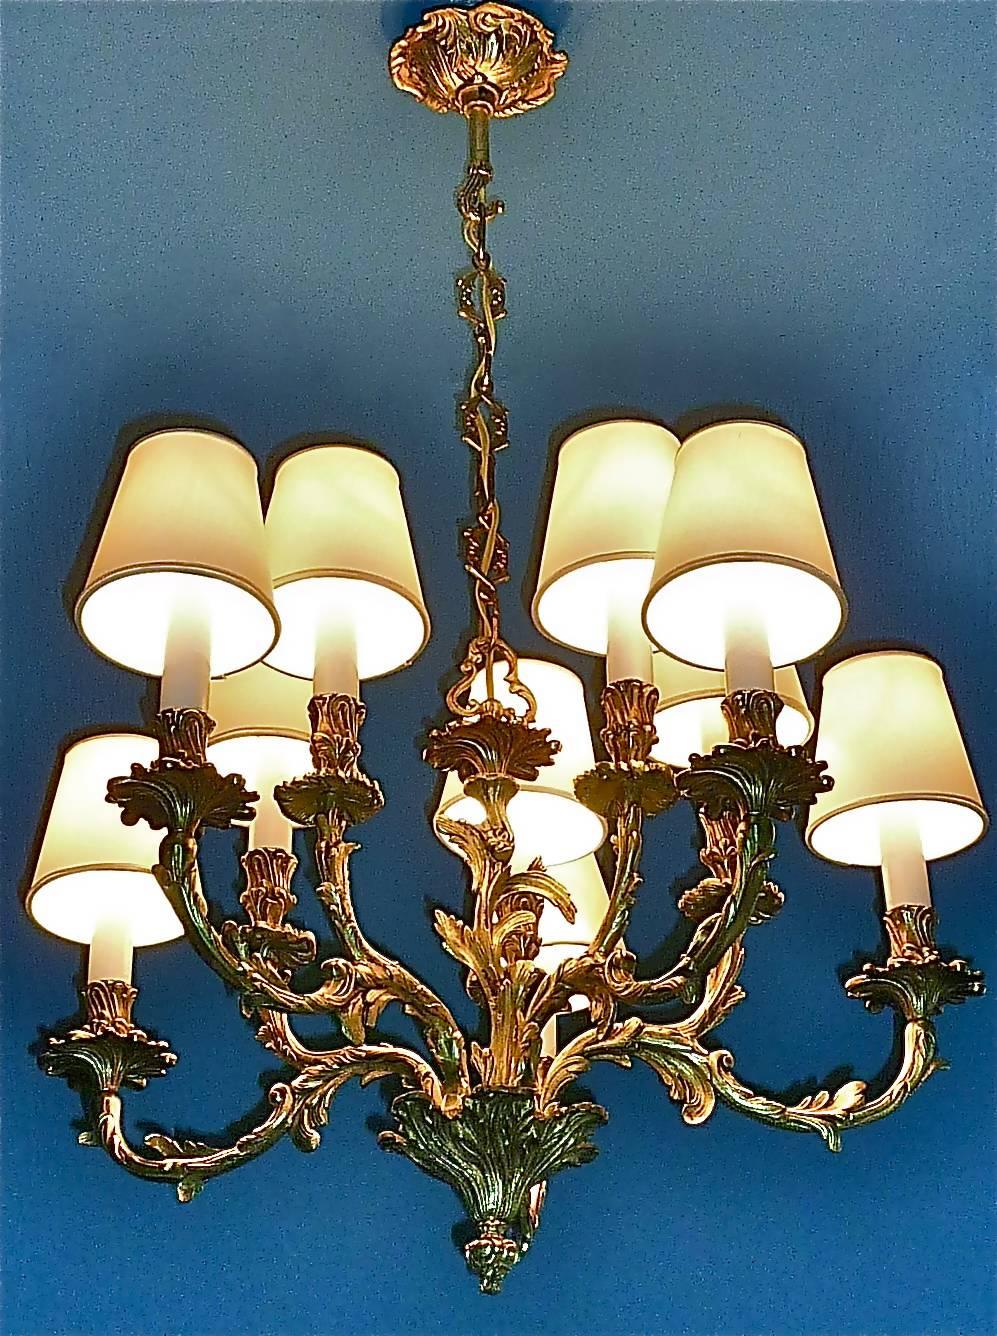 Precious French Baroque Rococo style ten-light chandelier which can be dated to the second half of the 20th century and possibly made by Maison Bagues, Paris. The wonderful manufactured chandelier is made of gilt bronze. It has a width of 55 cm /